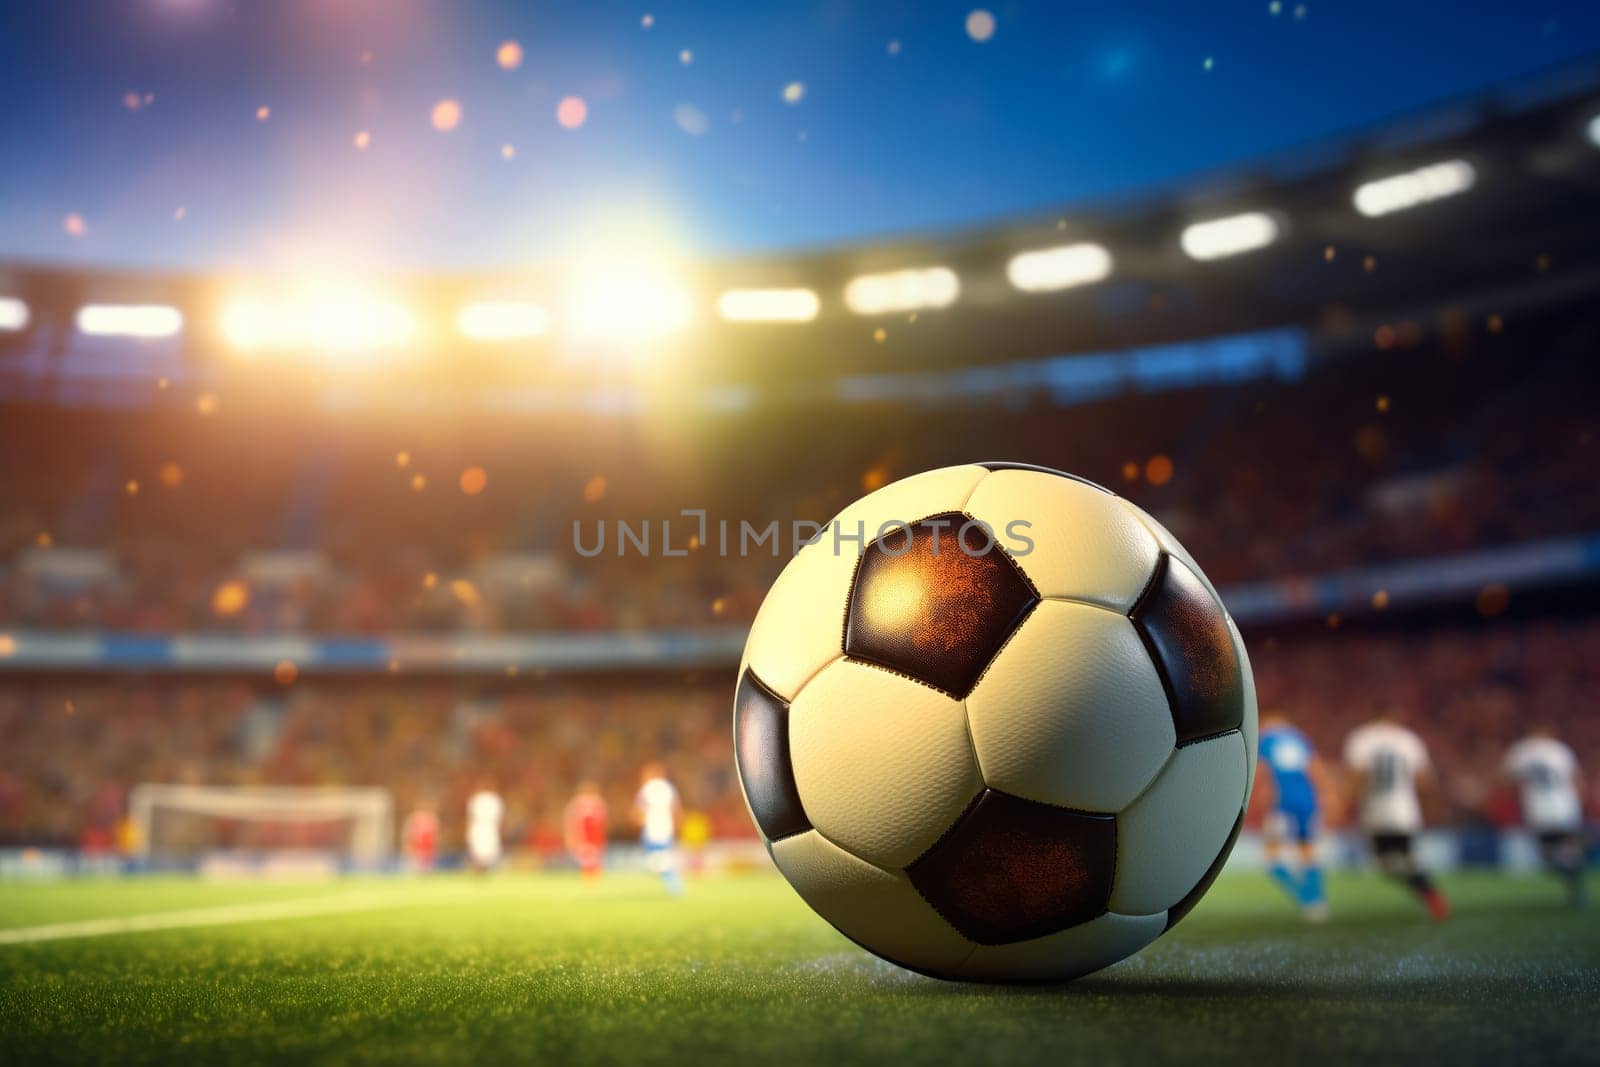 A soccer ball on a green field in soccer football stadium during game by dimol